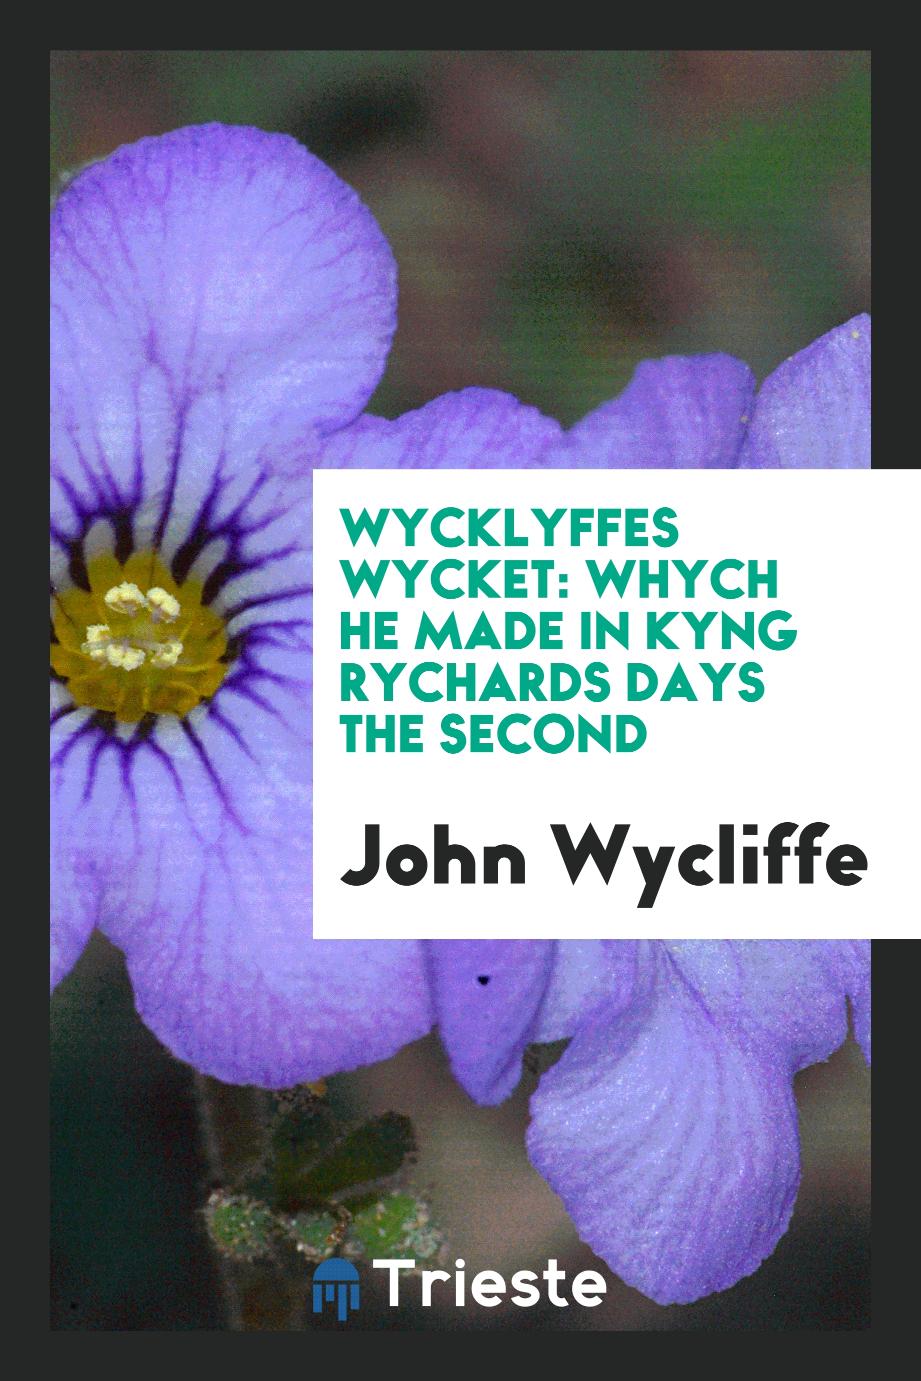 Wycklyffes Wycket: whych he made in Kyng Rychards days the Second